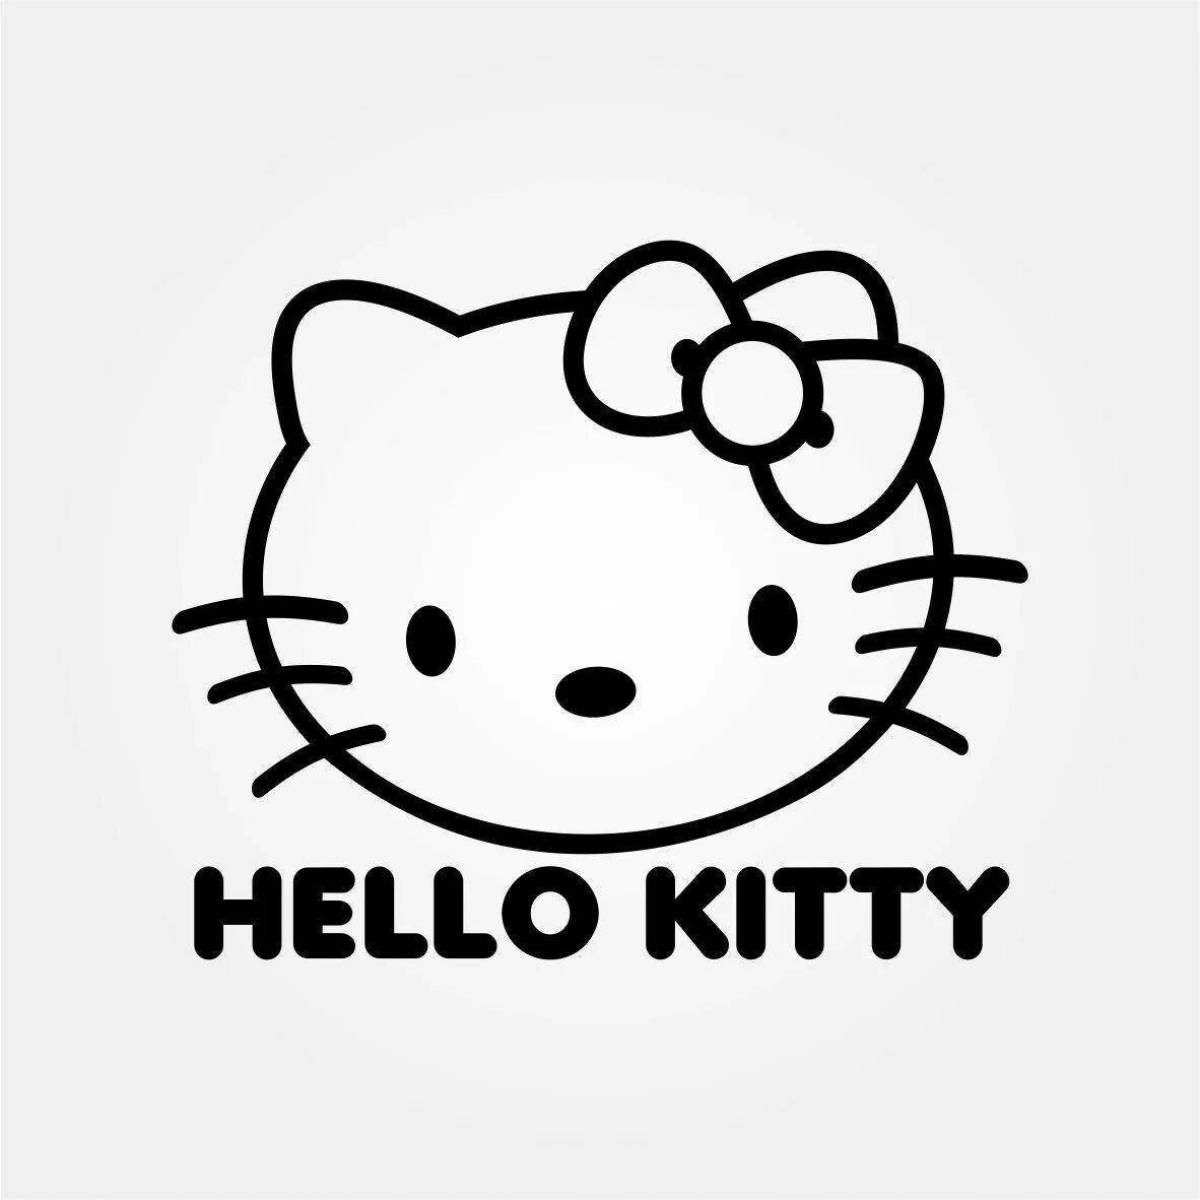 Hello kitty face coloring page while playing